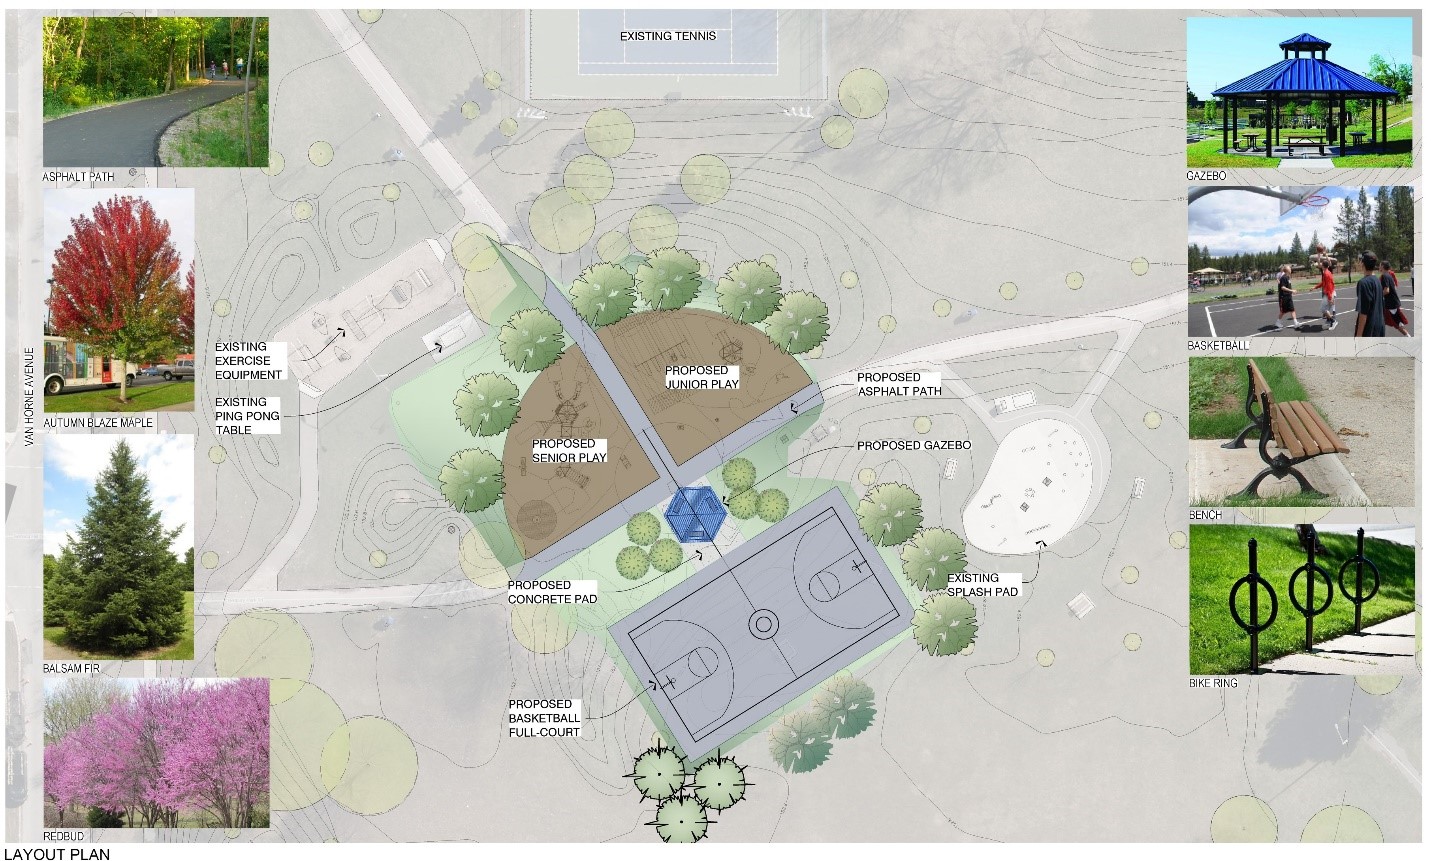 This image shows a plan view of the new playground layout. It shows a full basketball court, and playground, as well as a shade structure and addition of new trees